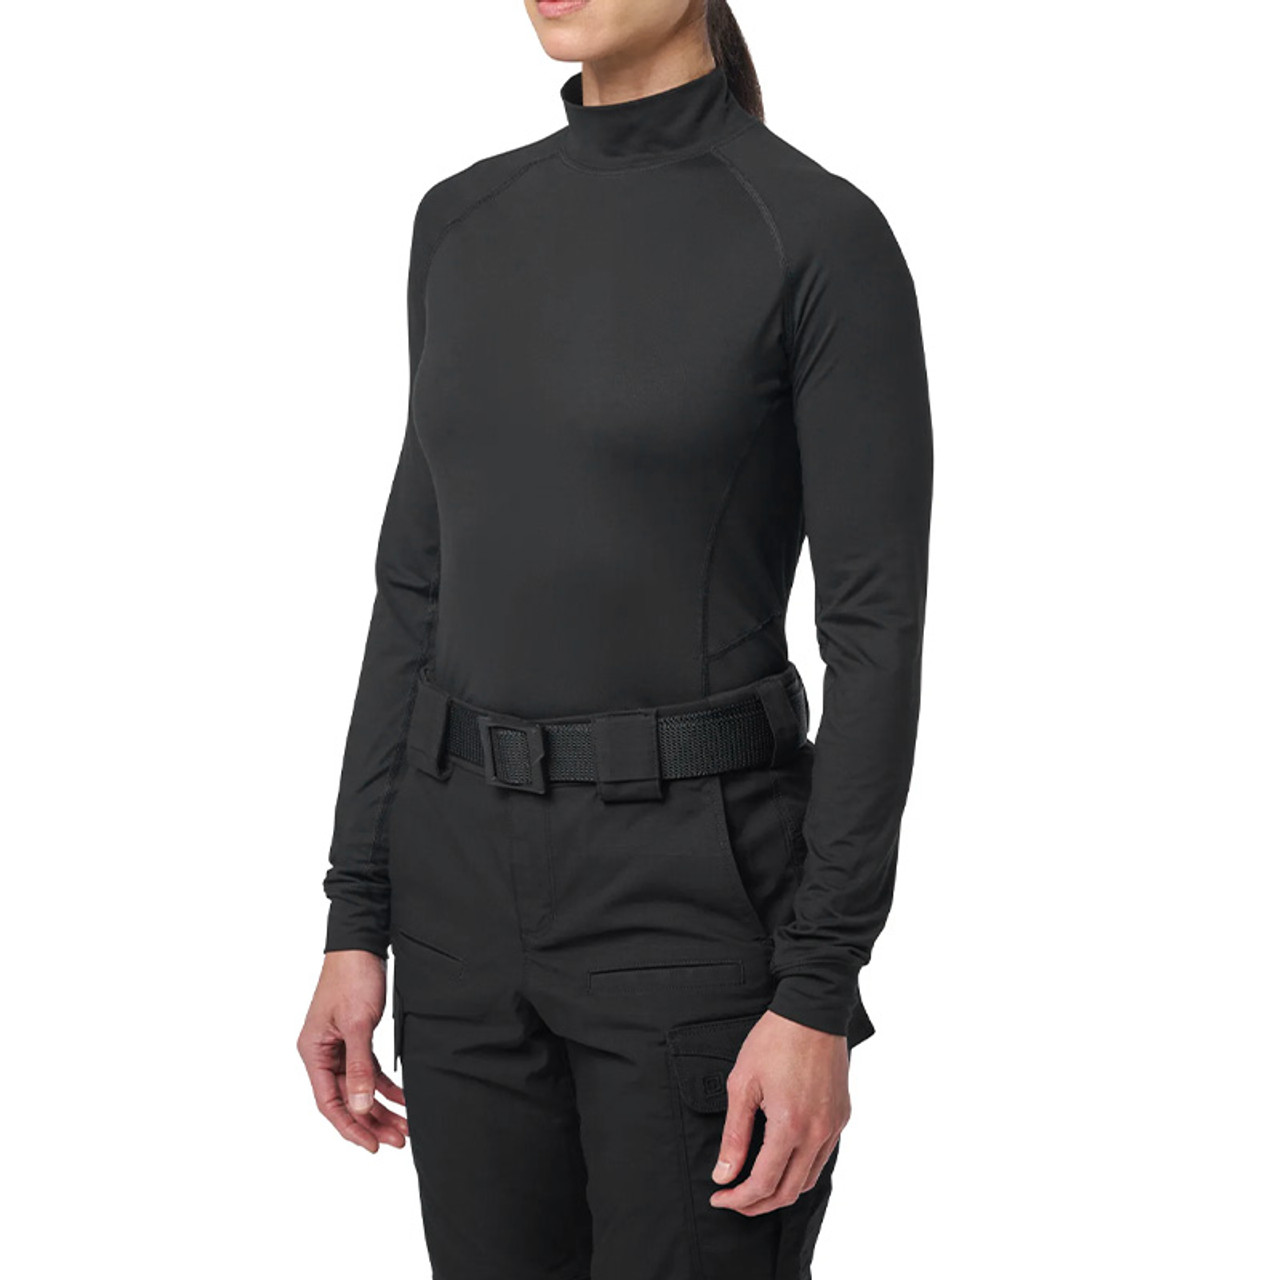 Angled-Neck Long-Sleeve Top